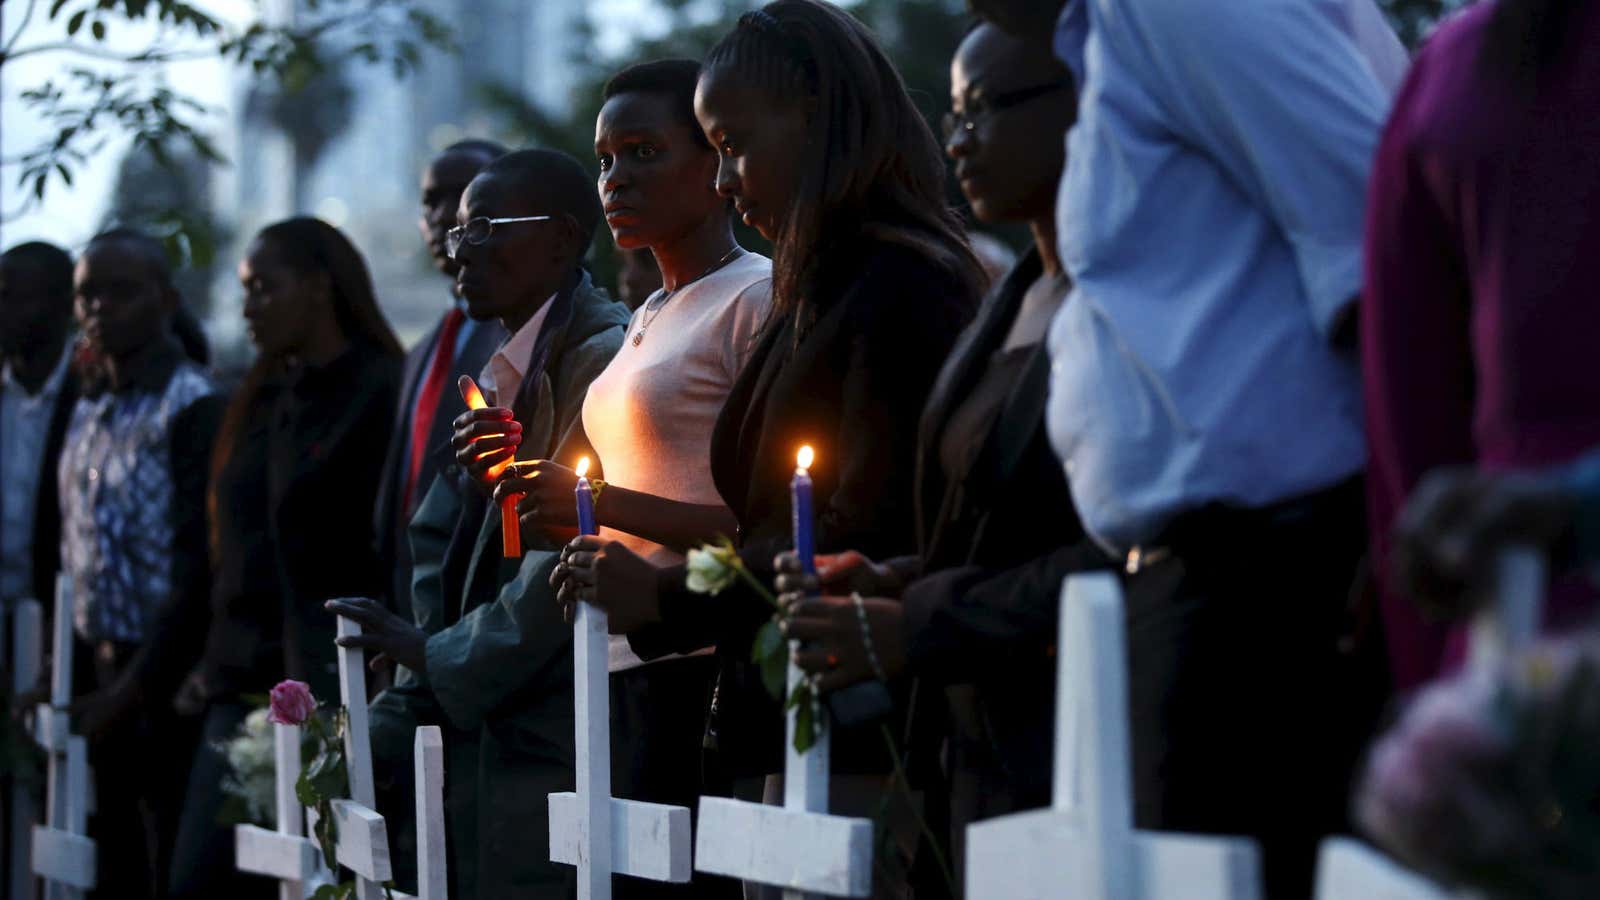 Kenyans attend a memorial vigil in Nairobi for the victims of an attack by gunmen at the Garissa University College in 2015.